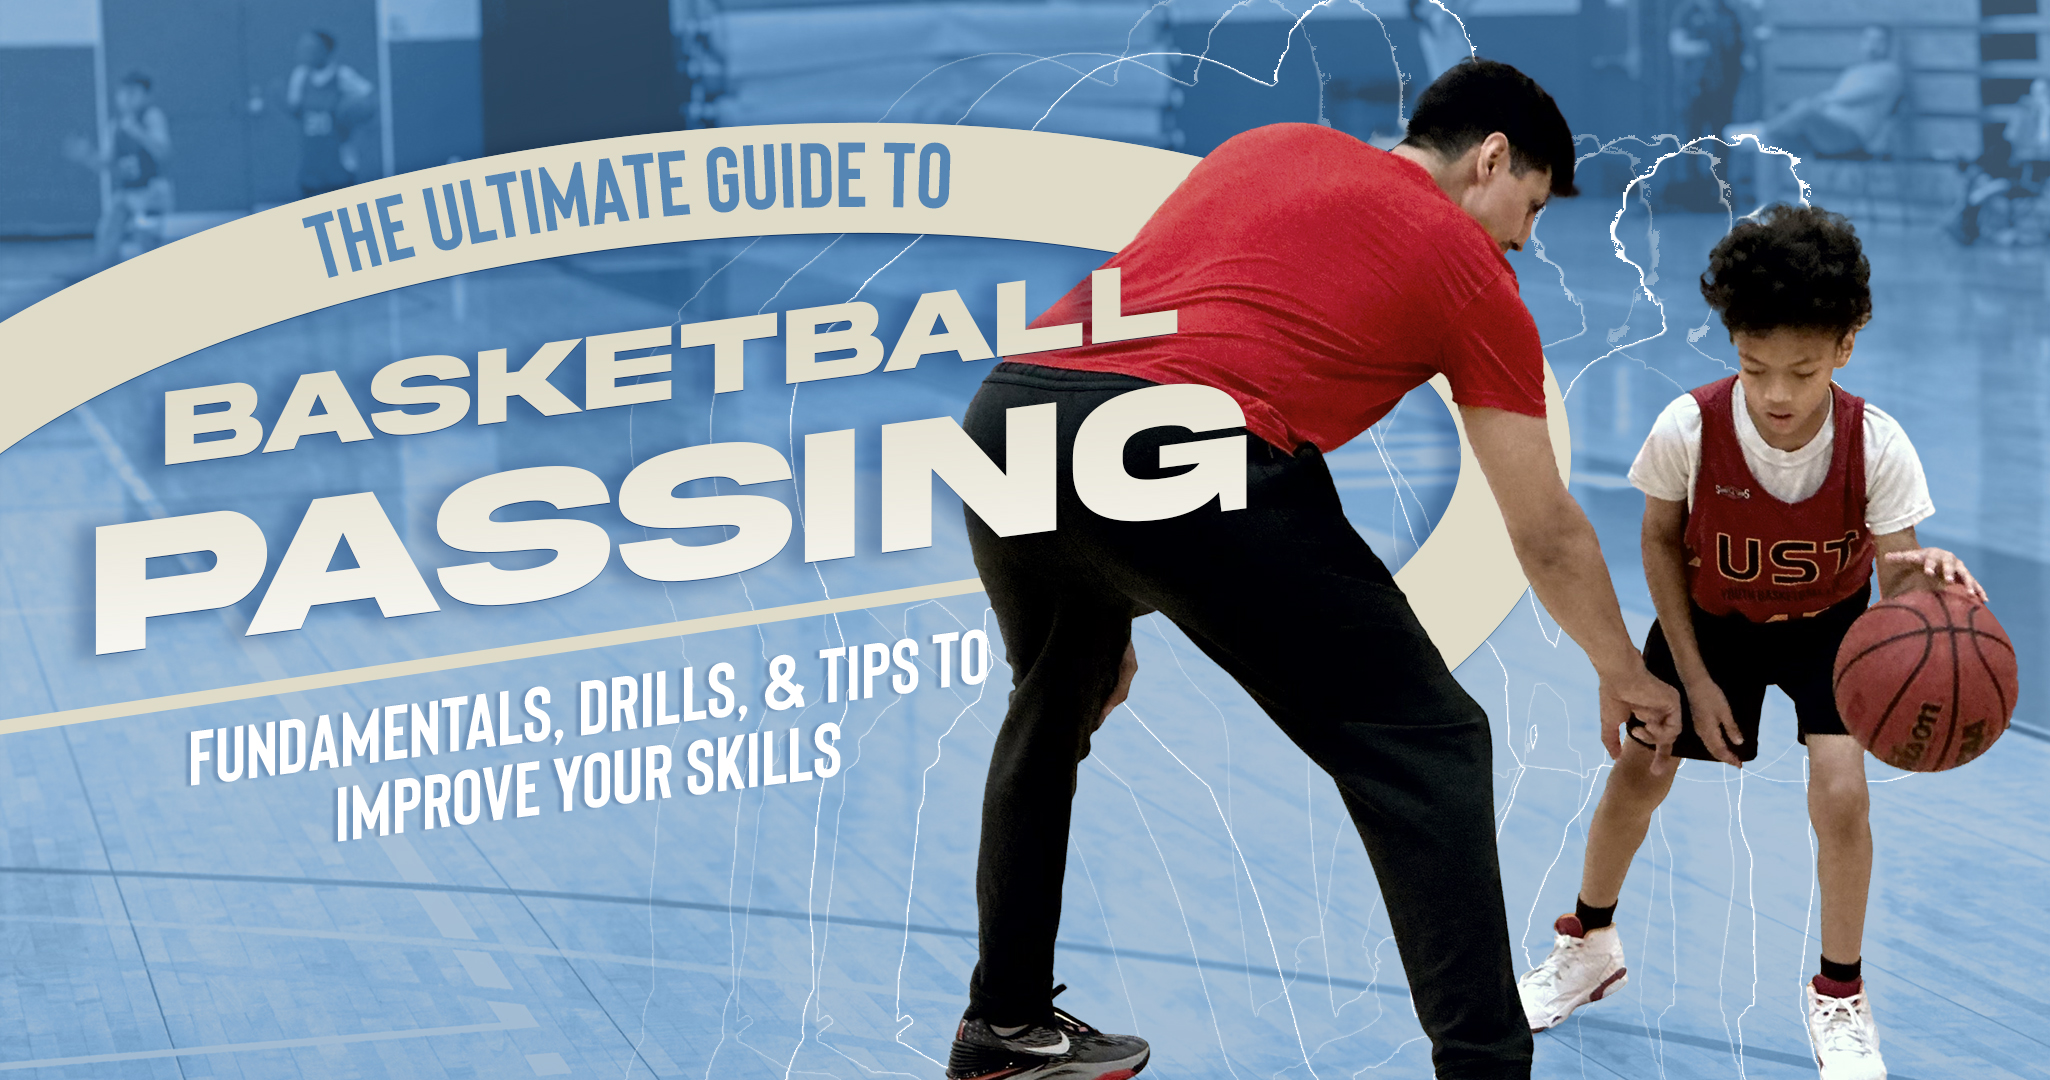 Guide to Basketball Passing